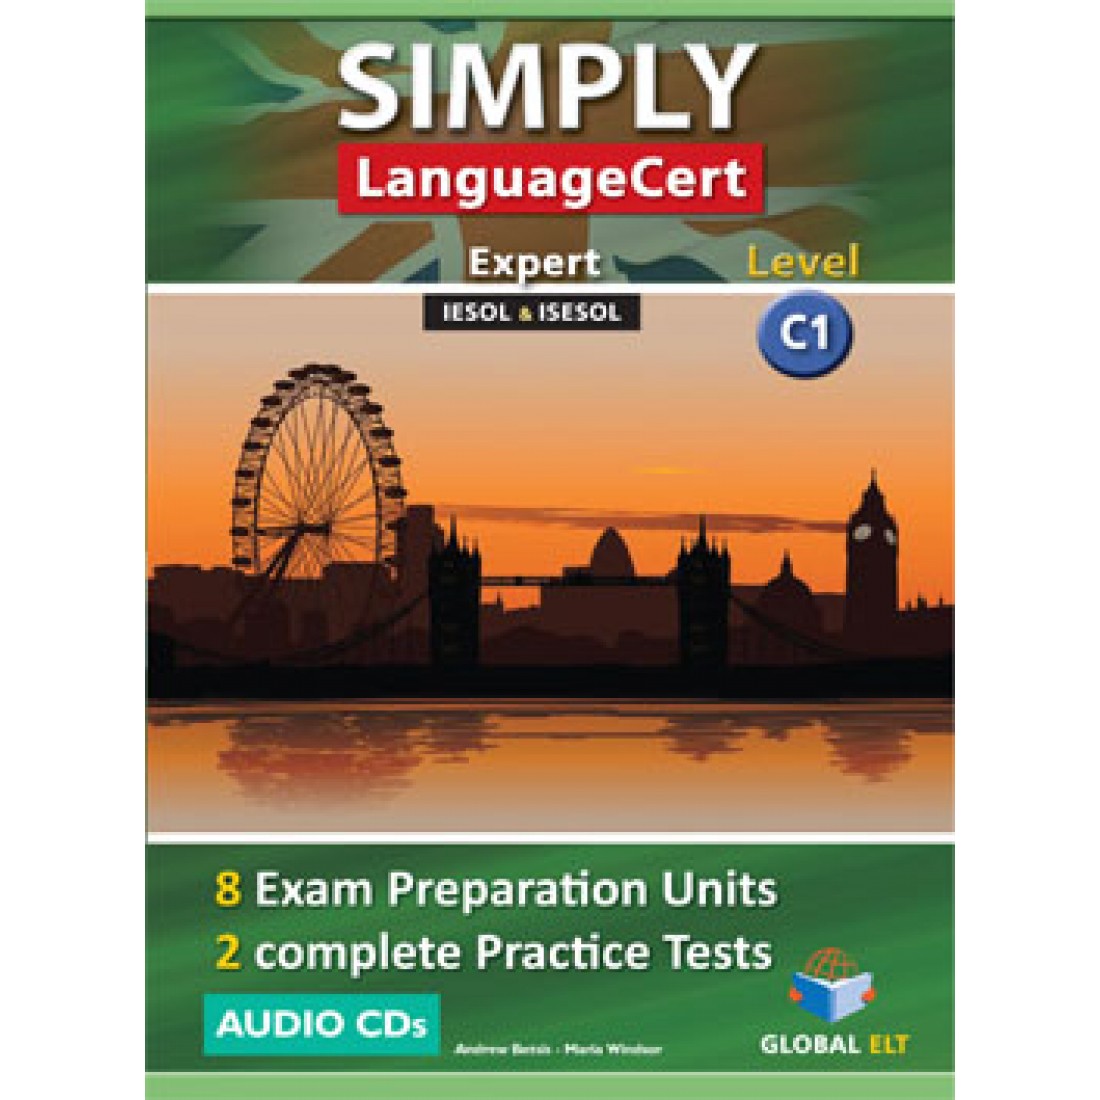 ELT book Test. English book Level b1. Global Tests Unit 2. English for Business communication student's book.